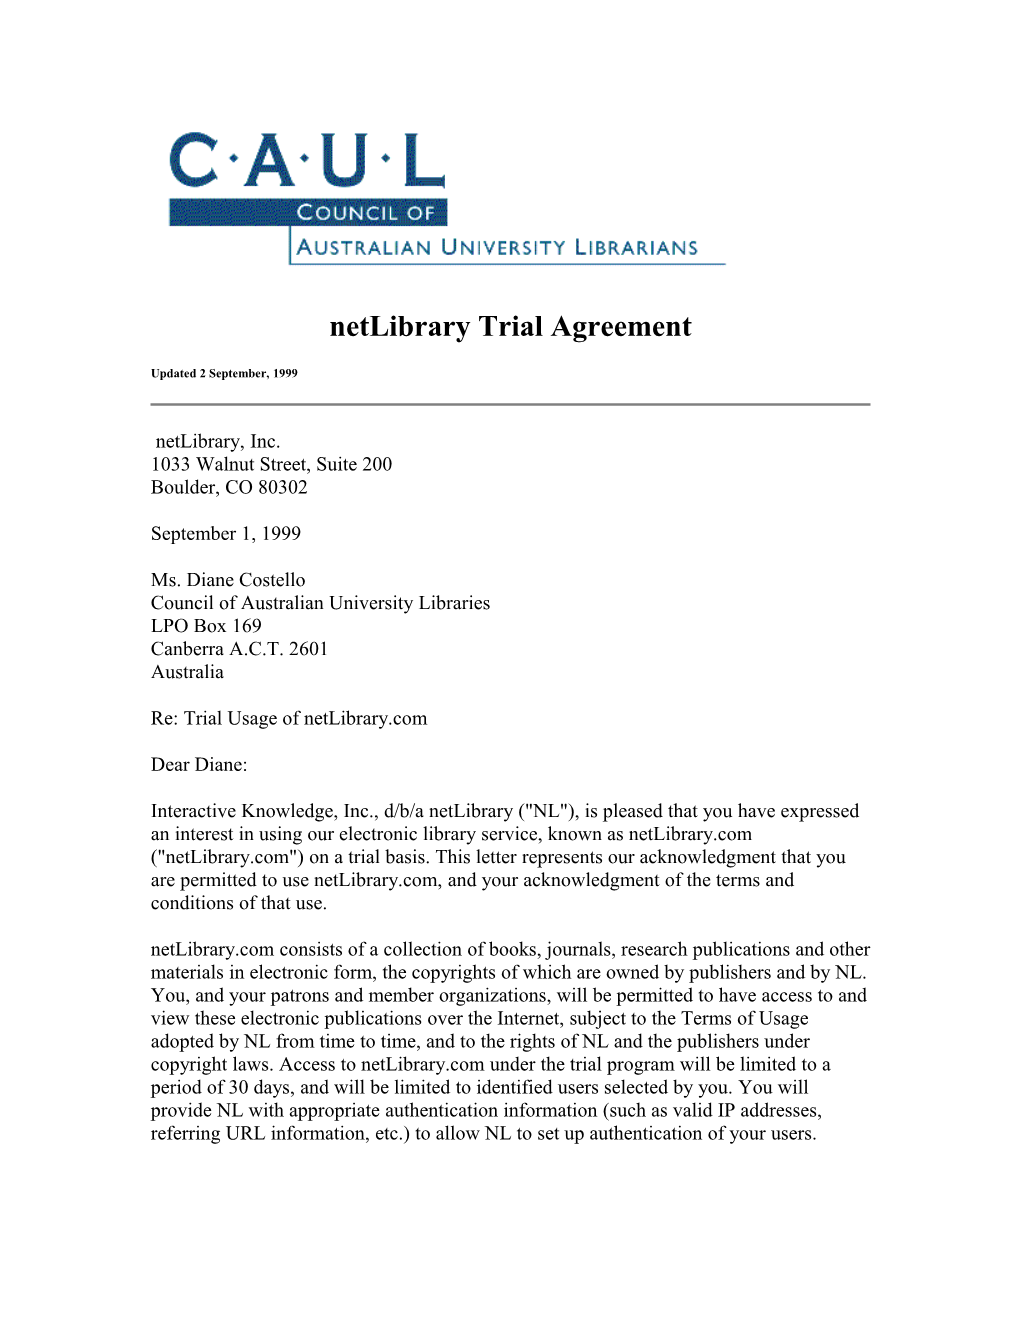 Netlibrary Trial Agreement